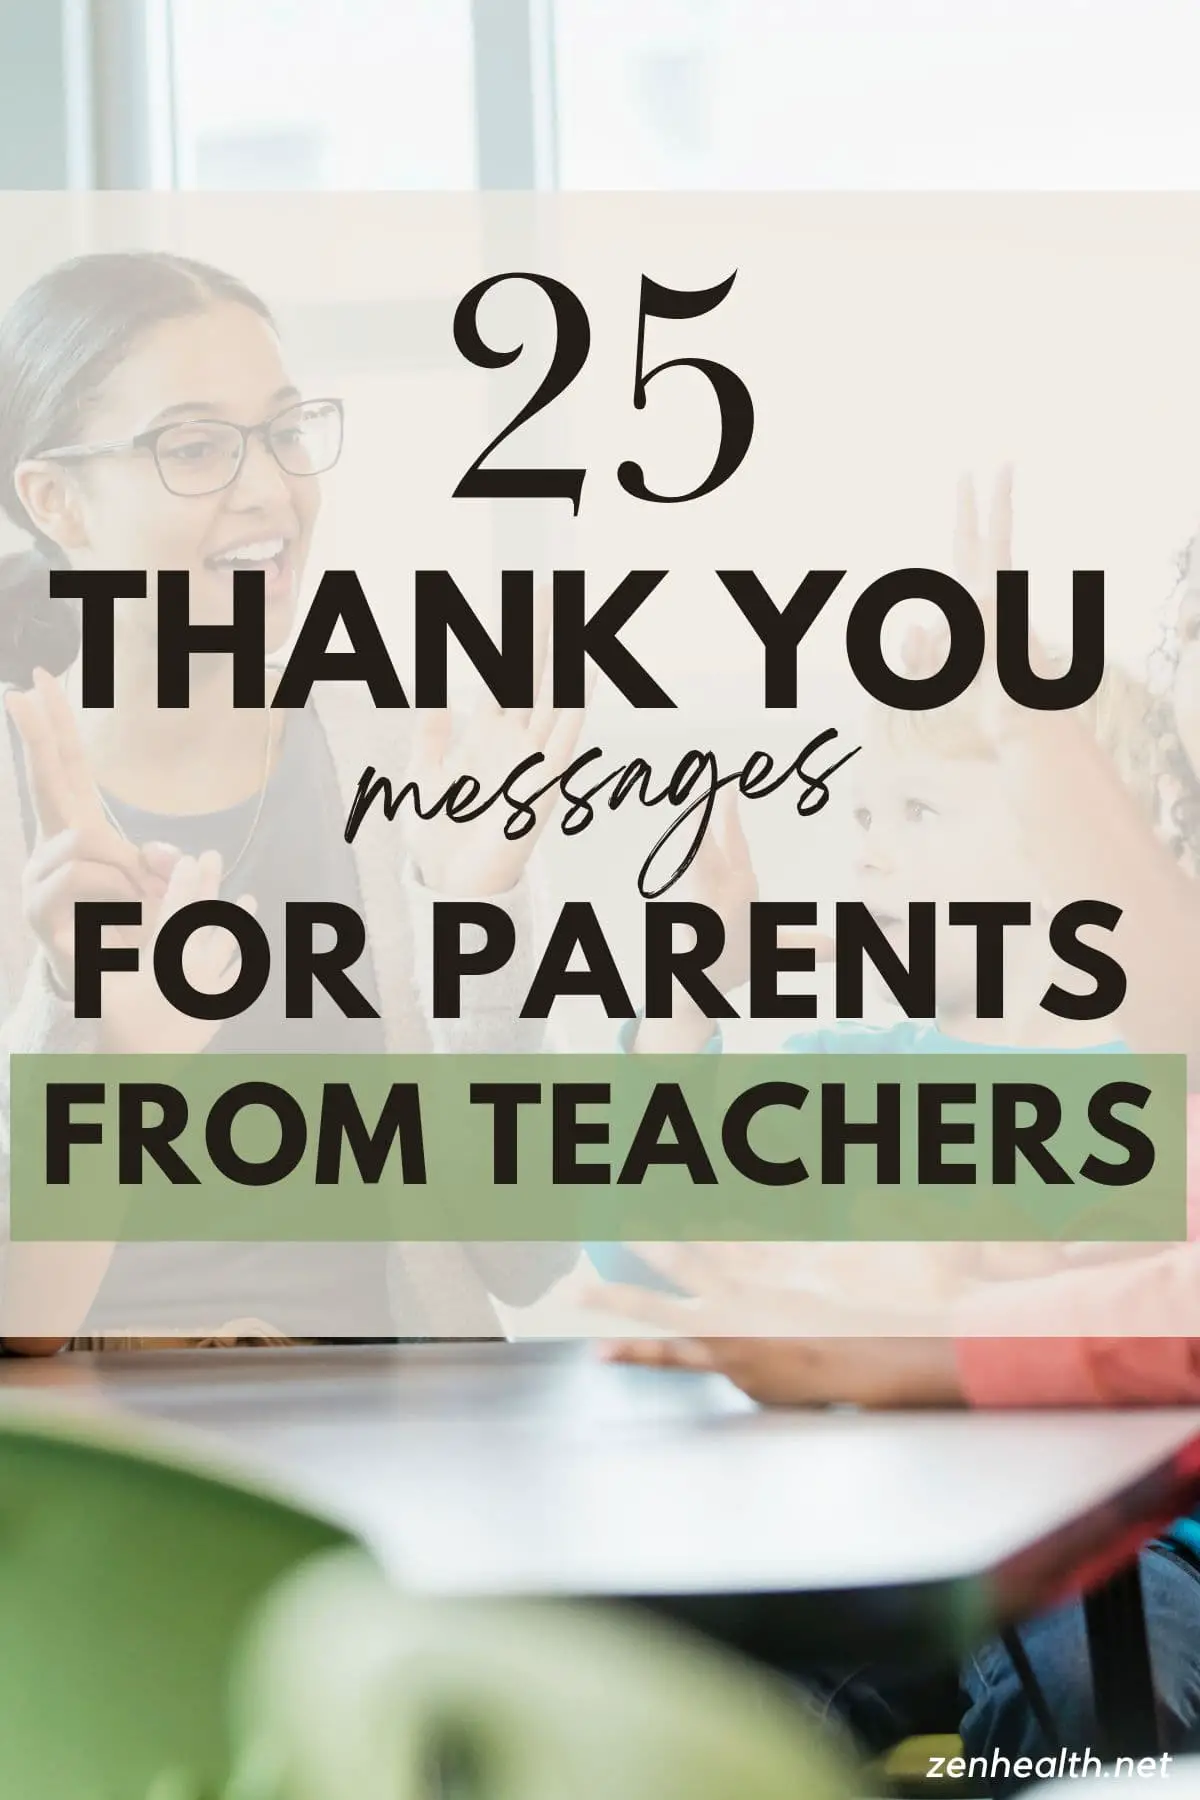 25 thank you messages for parents from teachers text overlay on a teacher in a class with young kids